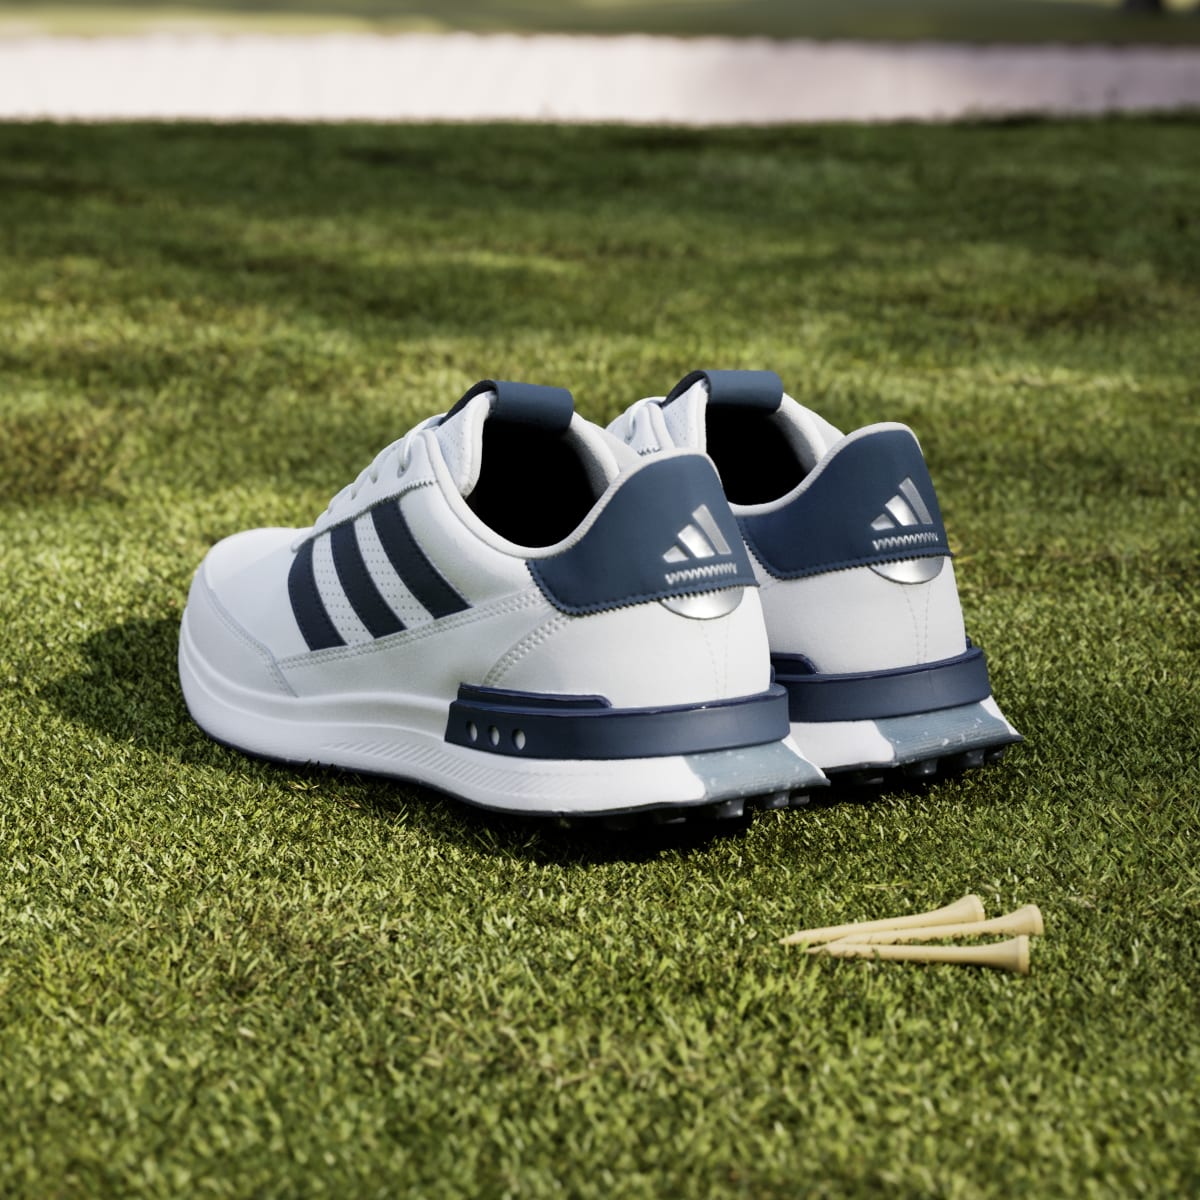 Adidas S2G Spikeless Leather 24 Golf Shoes. 5